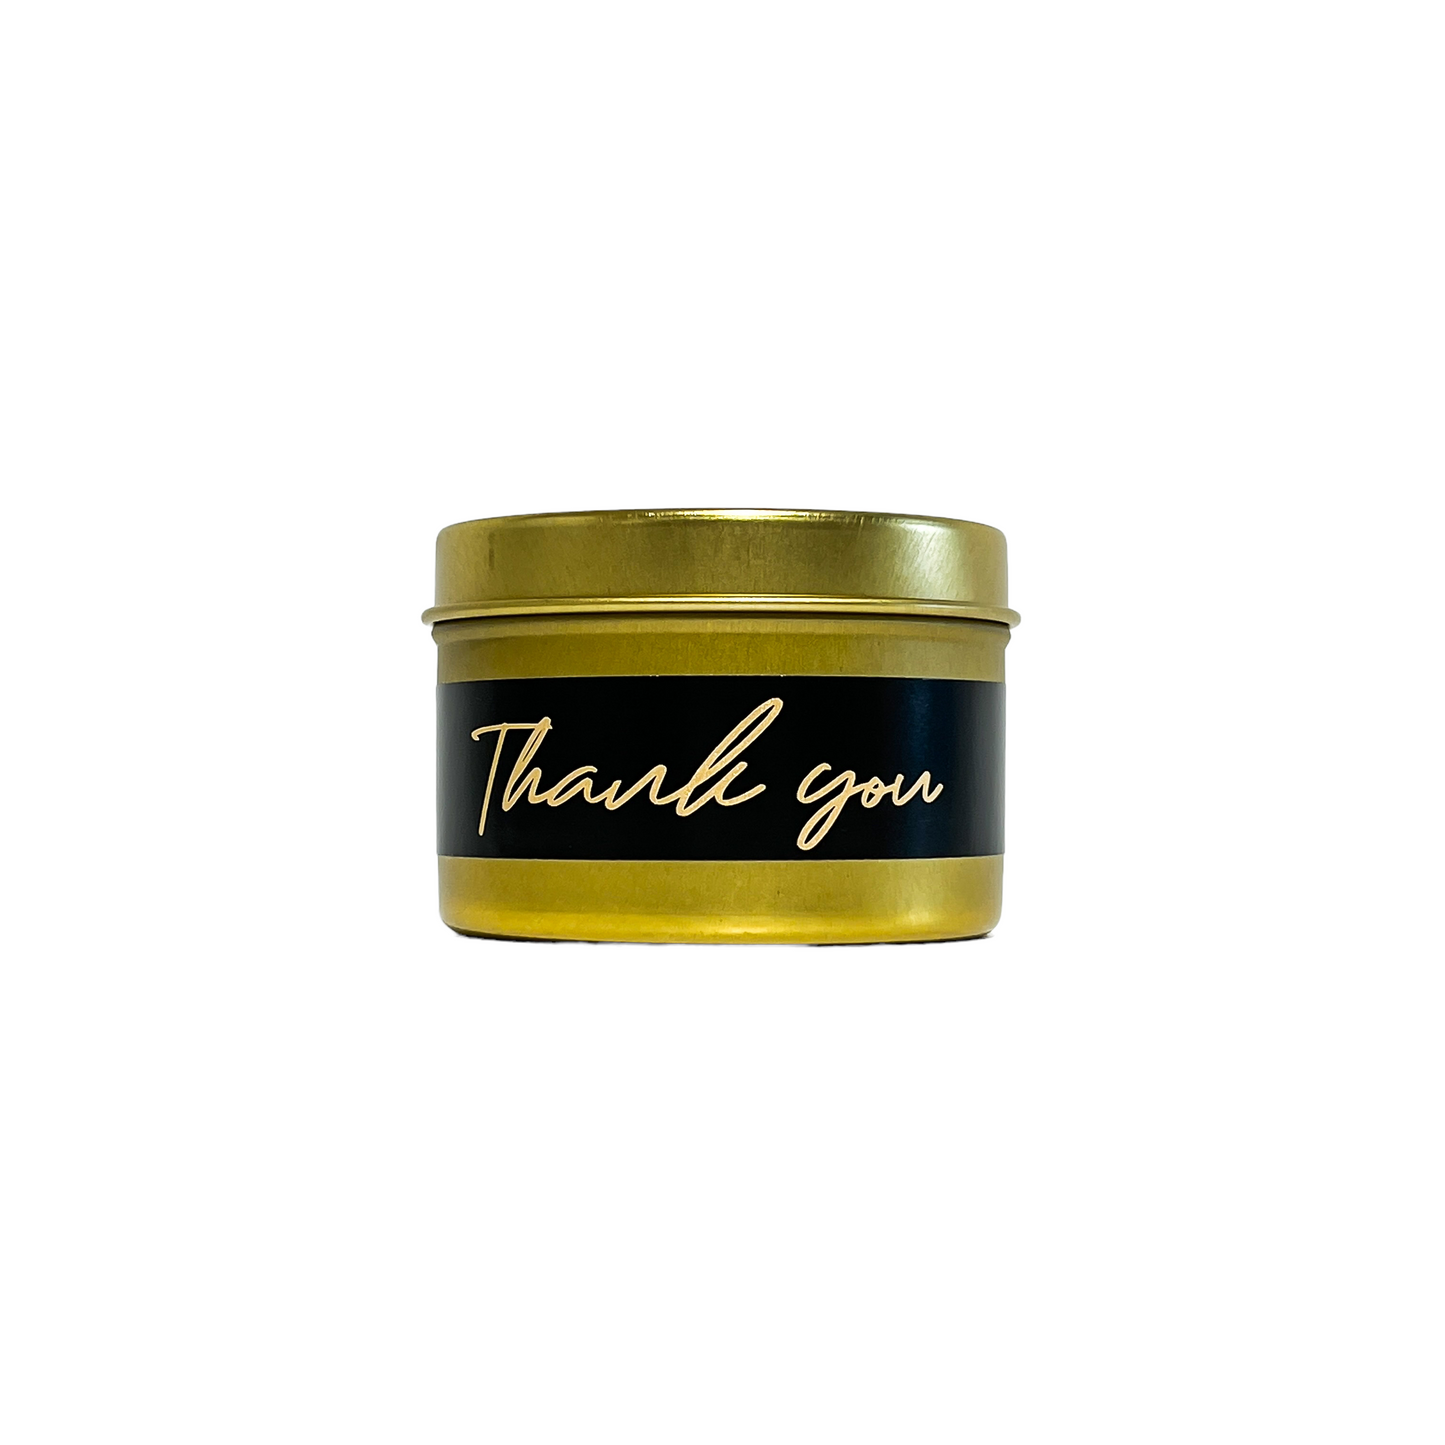 gold four ounces, pink salt and water lily scented soy wax candle with a gold and a black label that reads Thank you